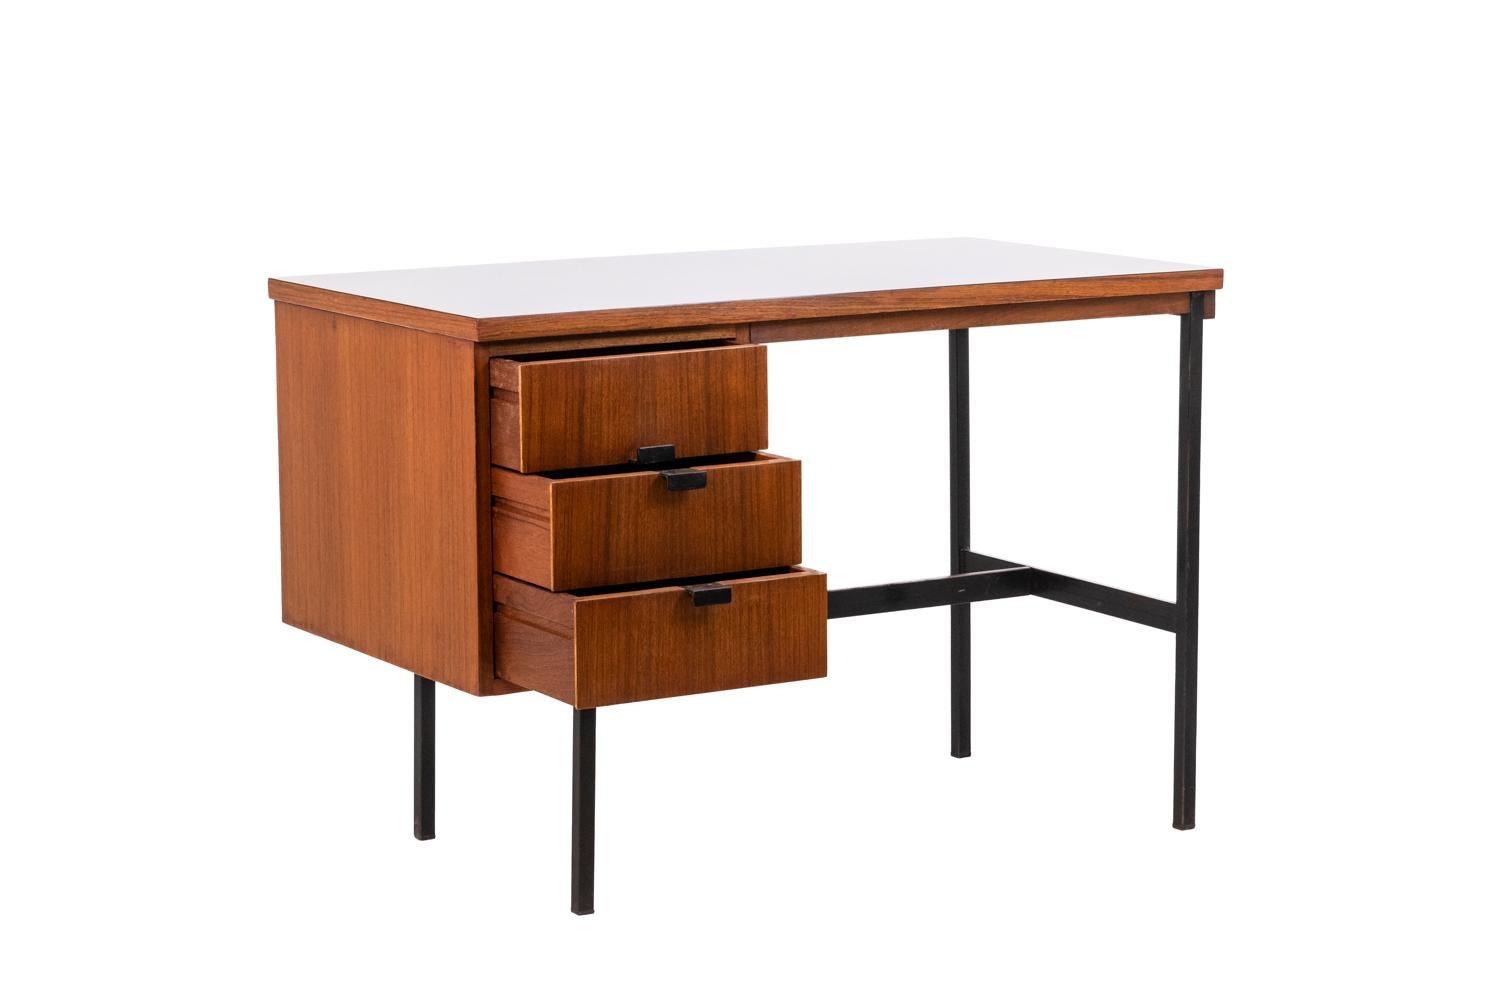 Jacques Hitier for Multiplex, Desk “Multitaple” in Mahogany, 1950s In Good Condition For Sale In Saint-Ouen, FR